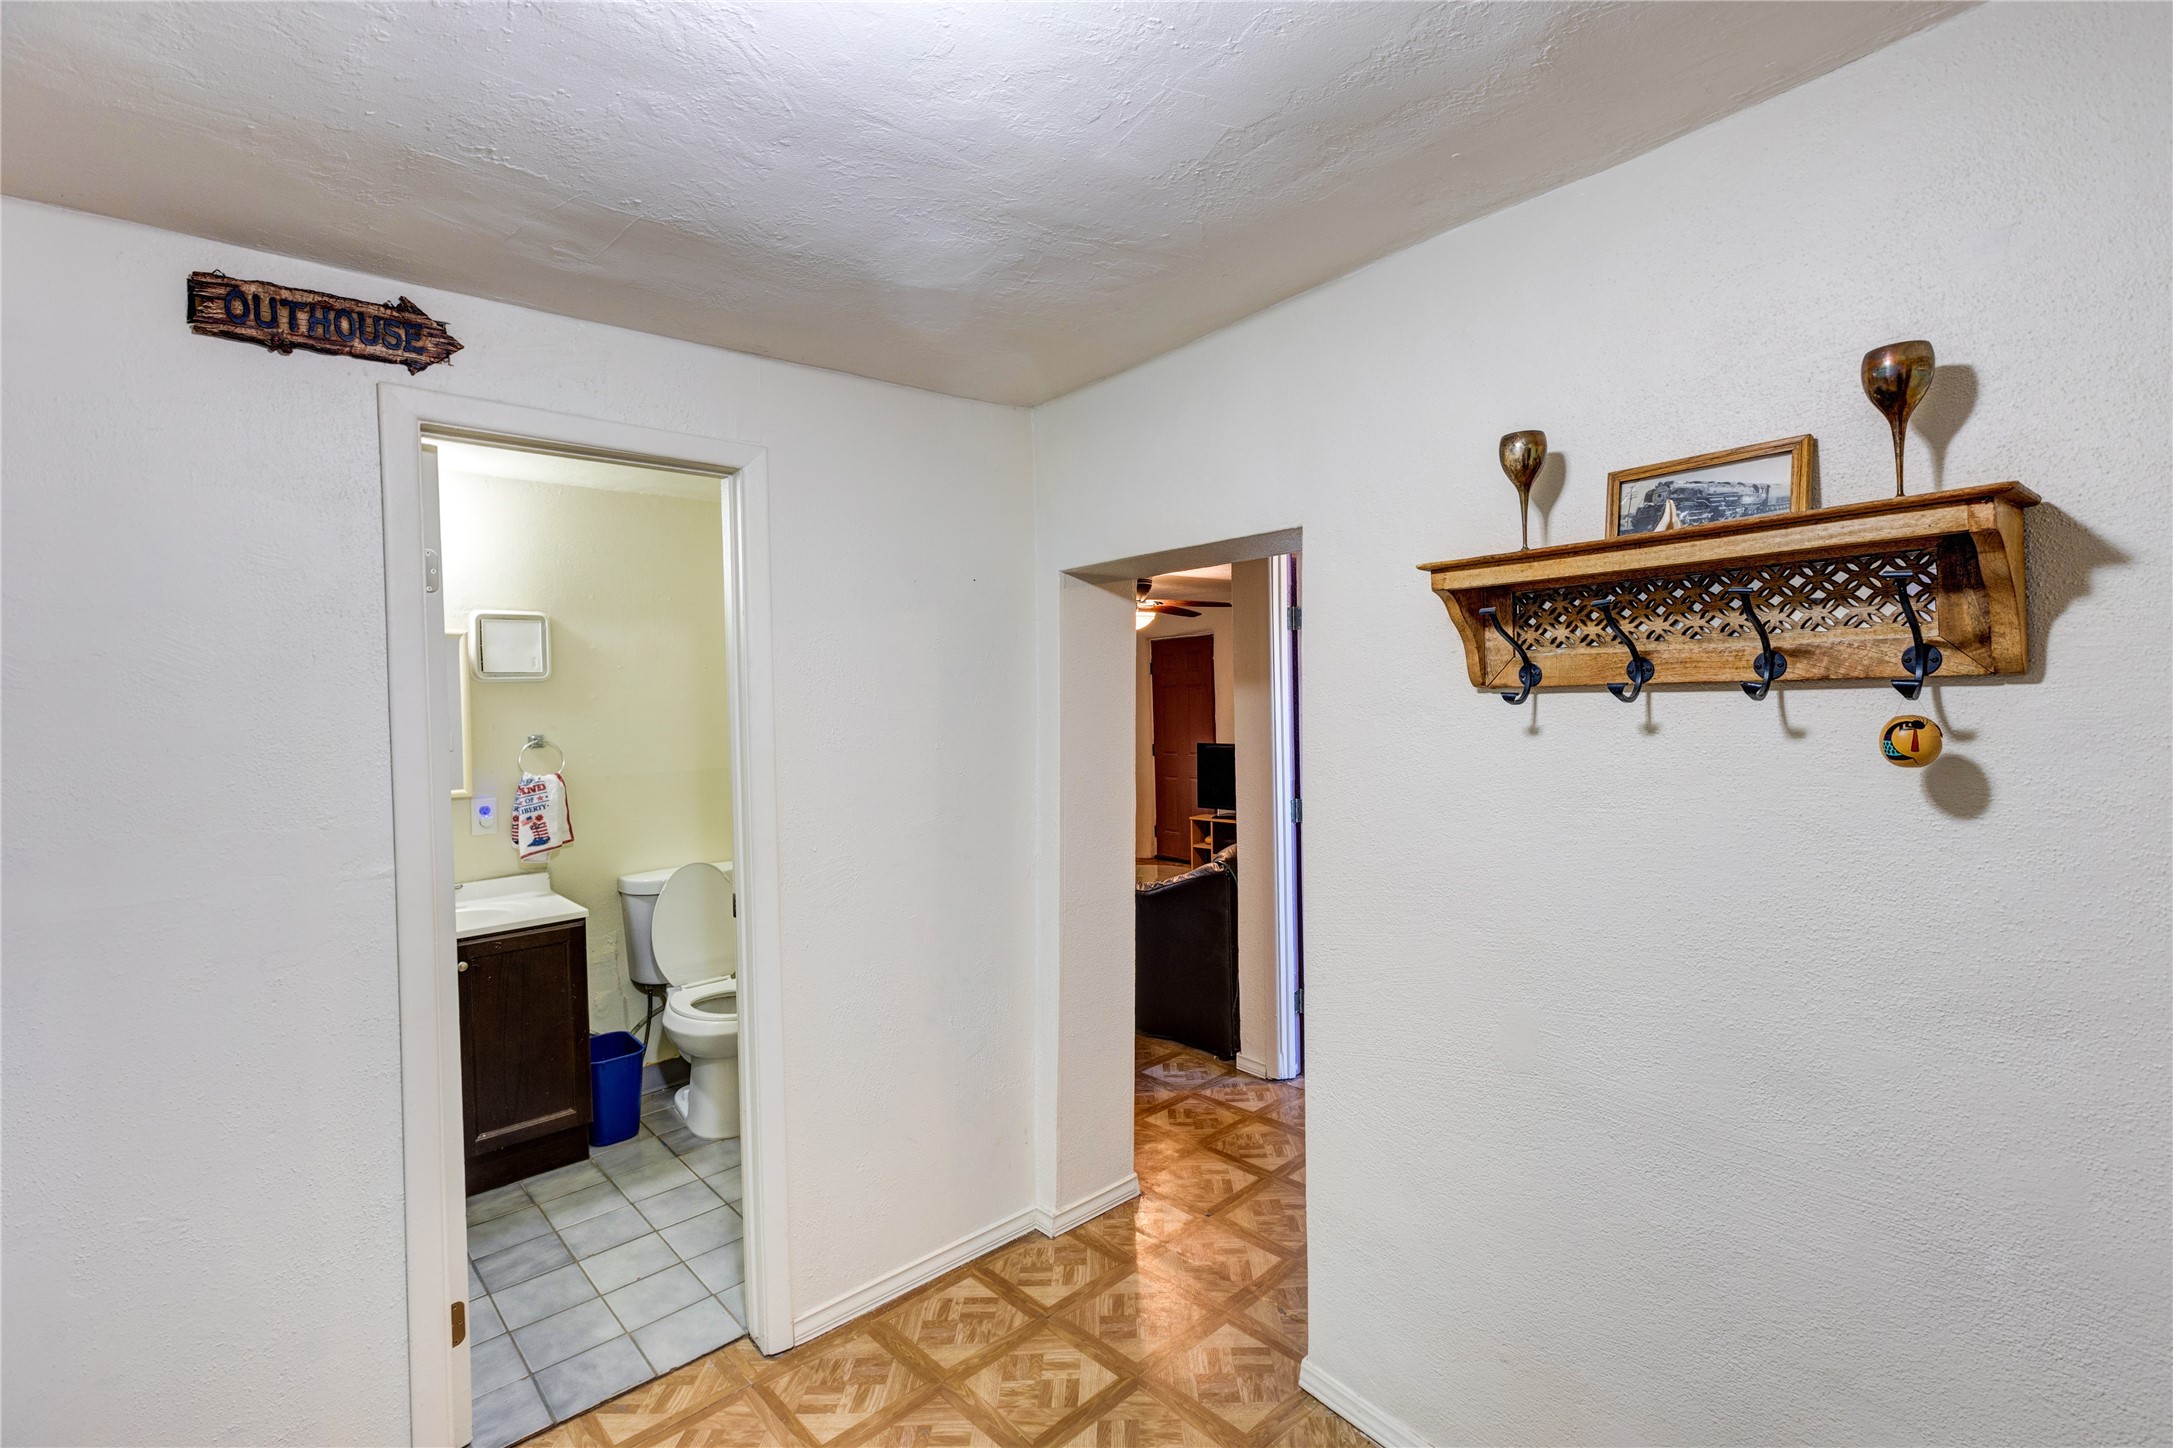 3900 Agua Fria Rd, Santa Fe, New Mexico 87507, 2 Bedrooms Bedrooms, ,1 BathroomBathrooms,Residential,For Sale,3900 Agua Fria Rd,202233252